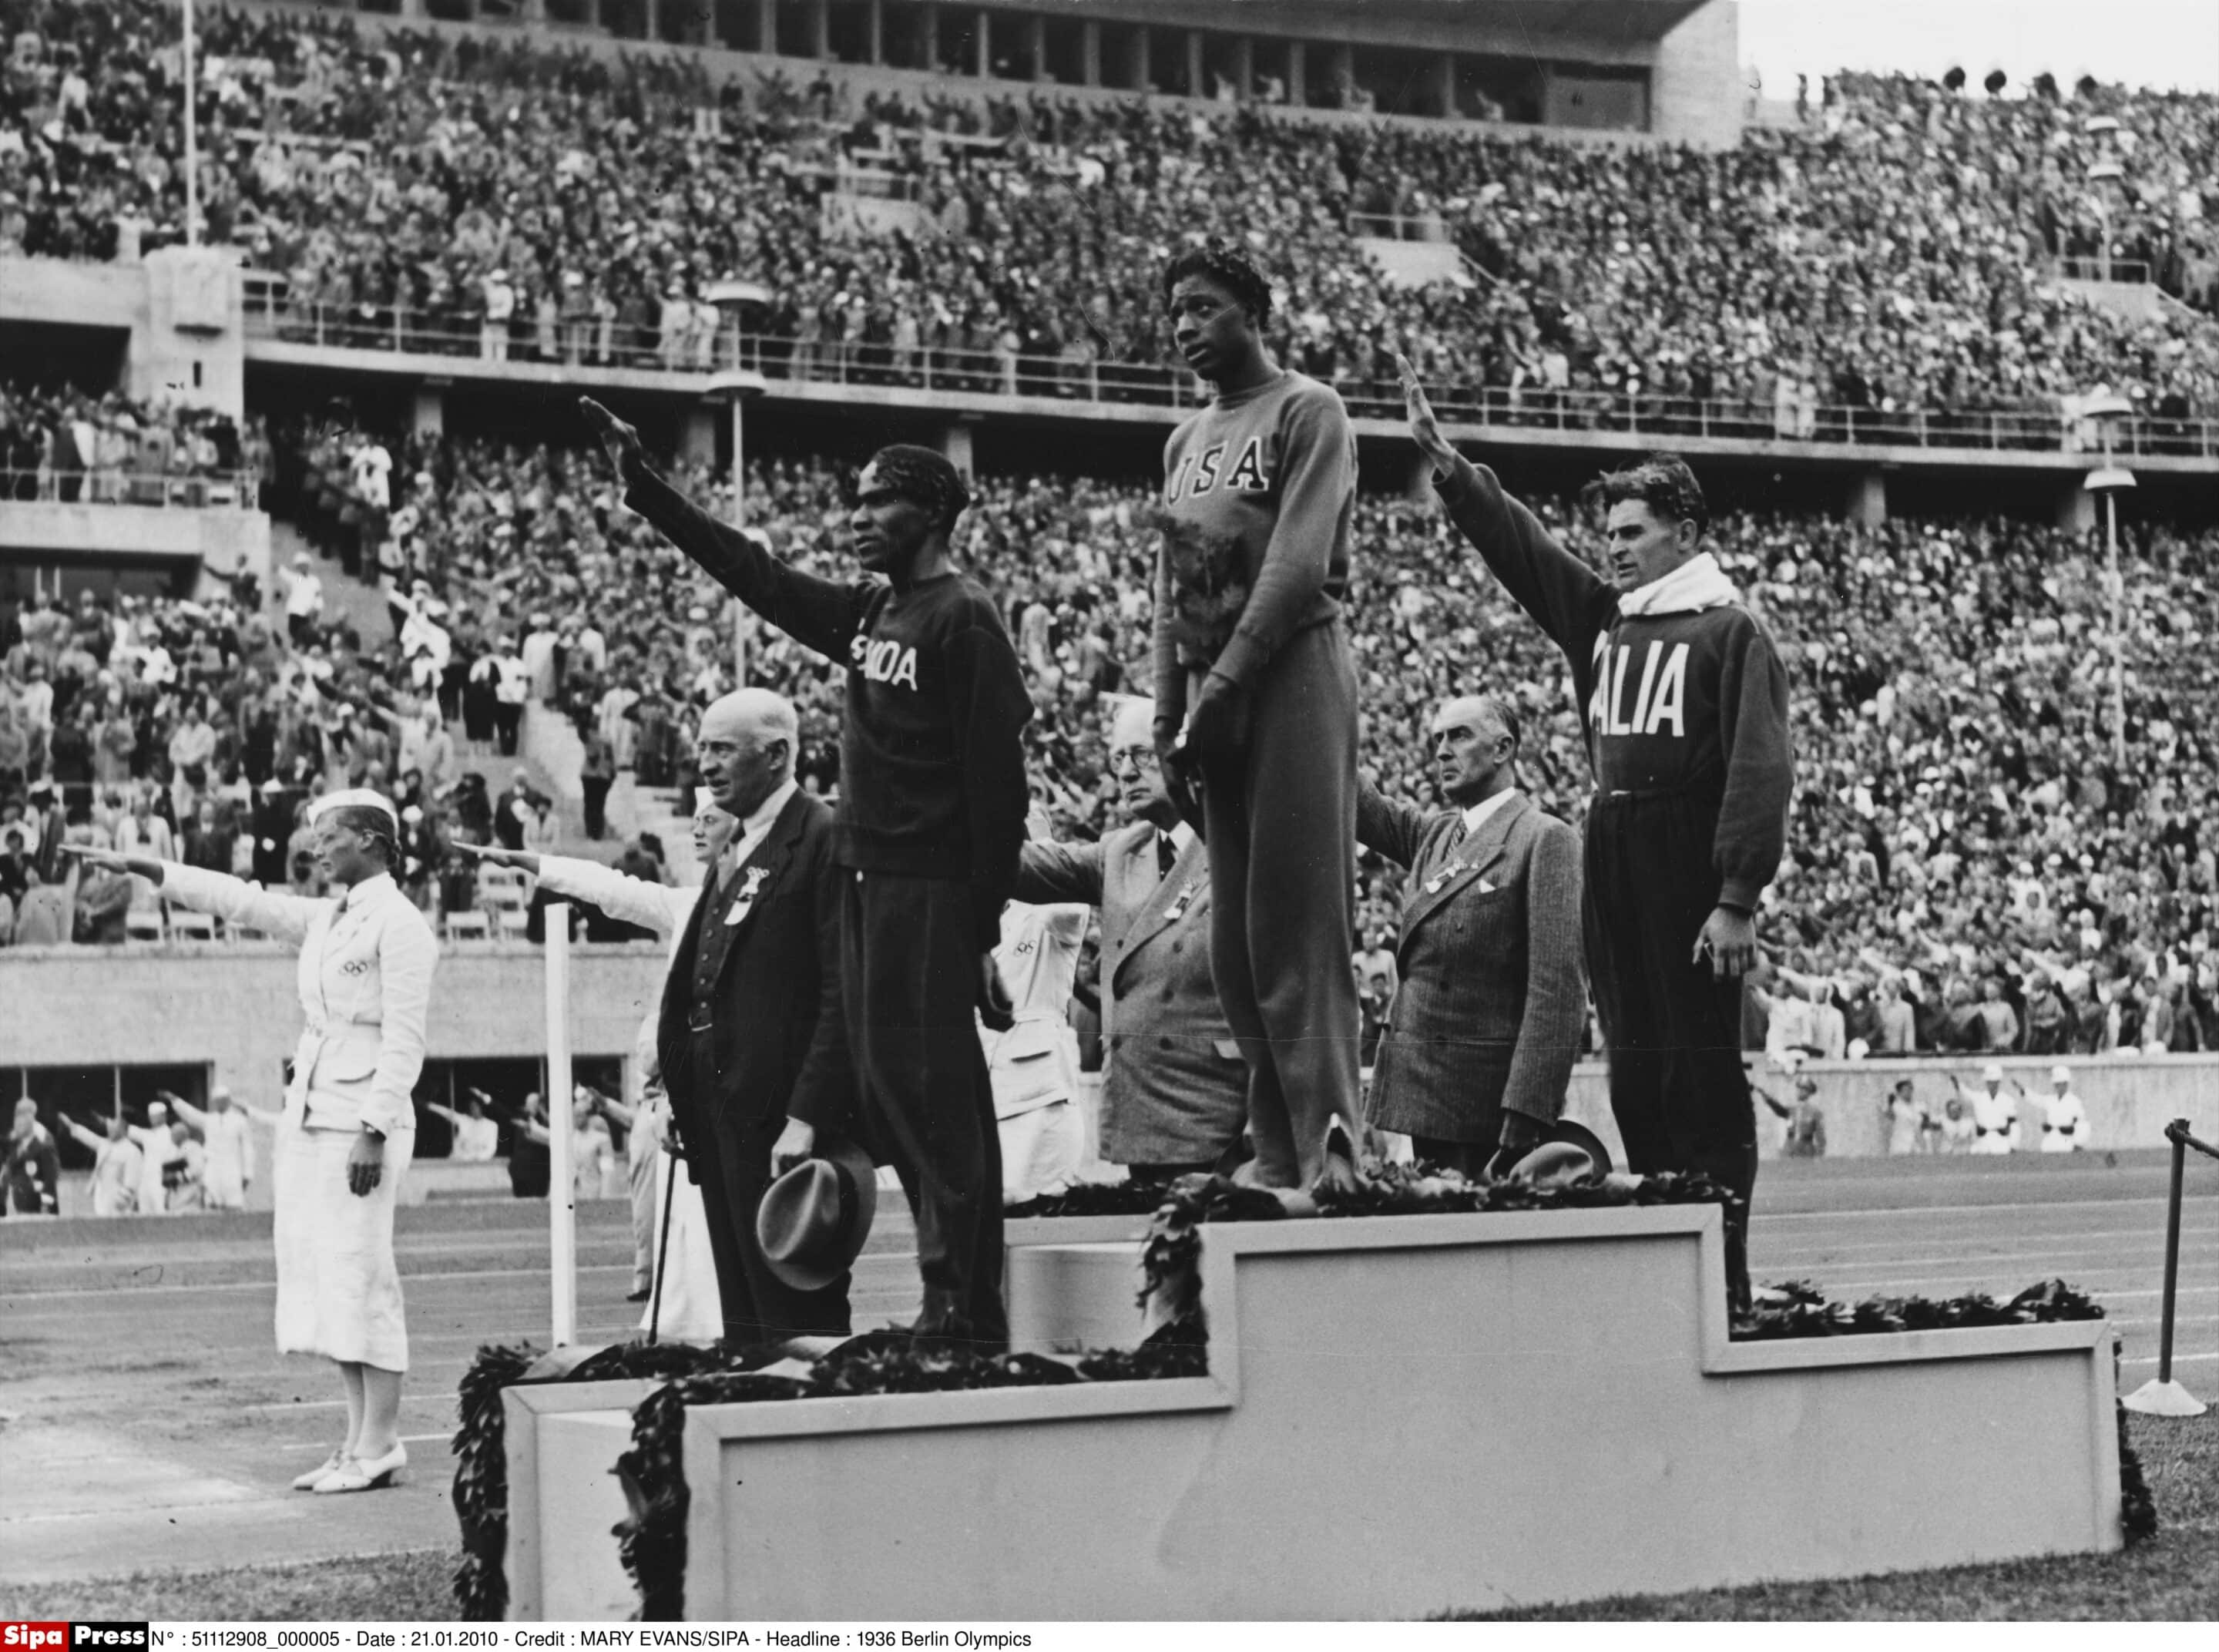 Winners of the 800 metres race on the winner's podium at the 1936 Berlin Olympic Games. 1st place, Woodruff of the USA, 2nd Lanci of Italy and 3rd Edwards of Canada.     Date: 1936